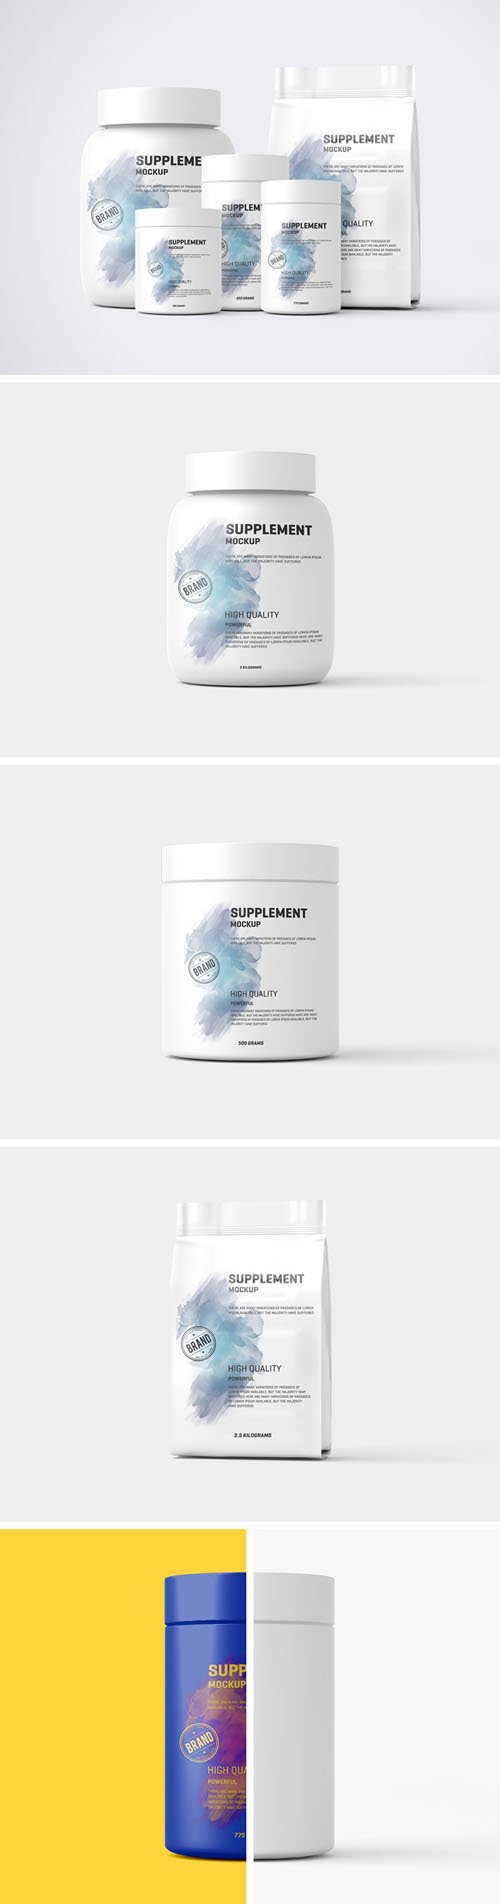 Supplement Pack PSD Mockups Collection